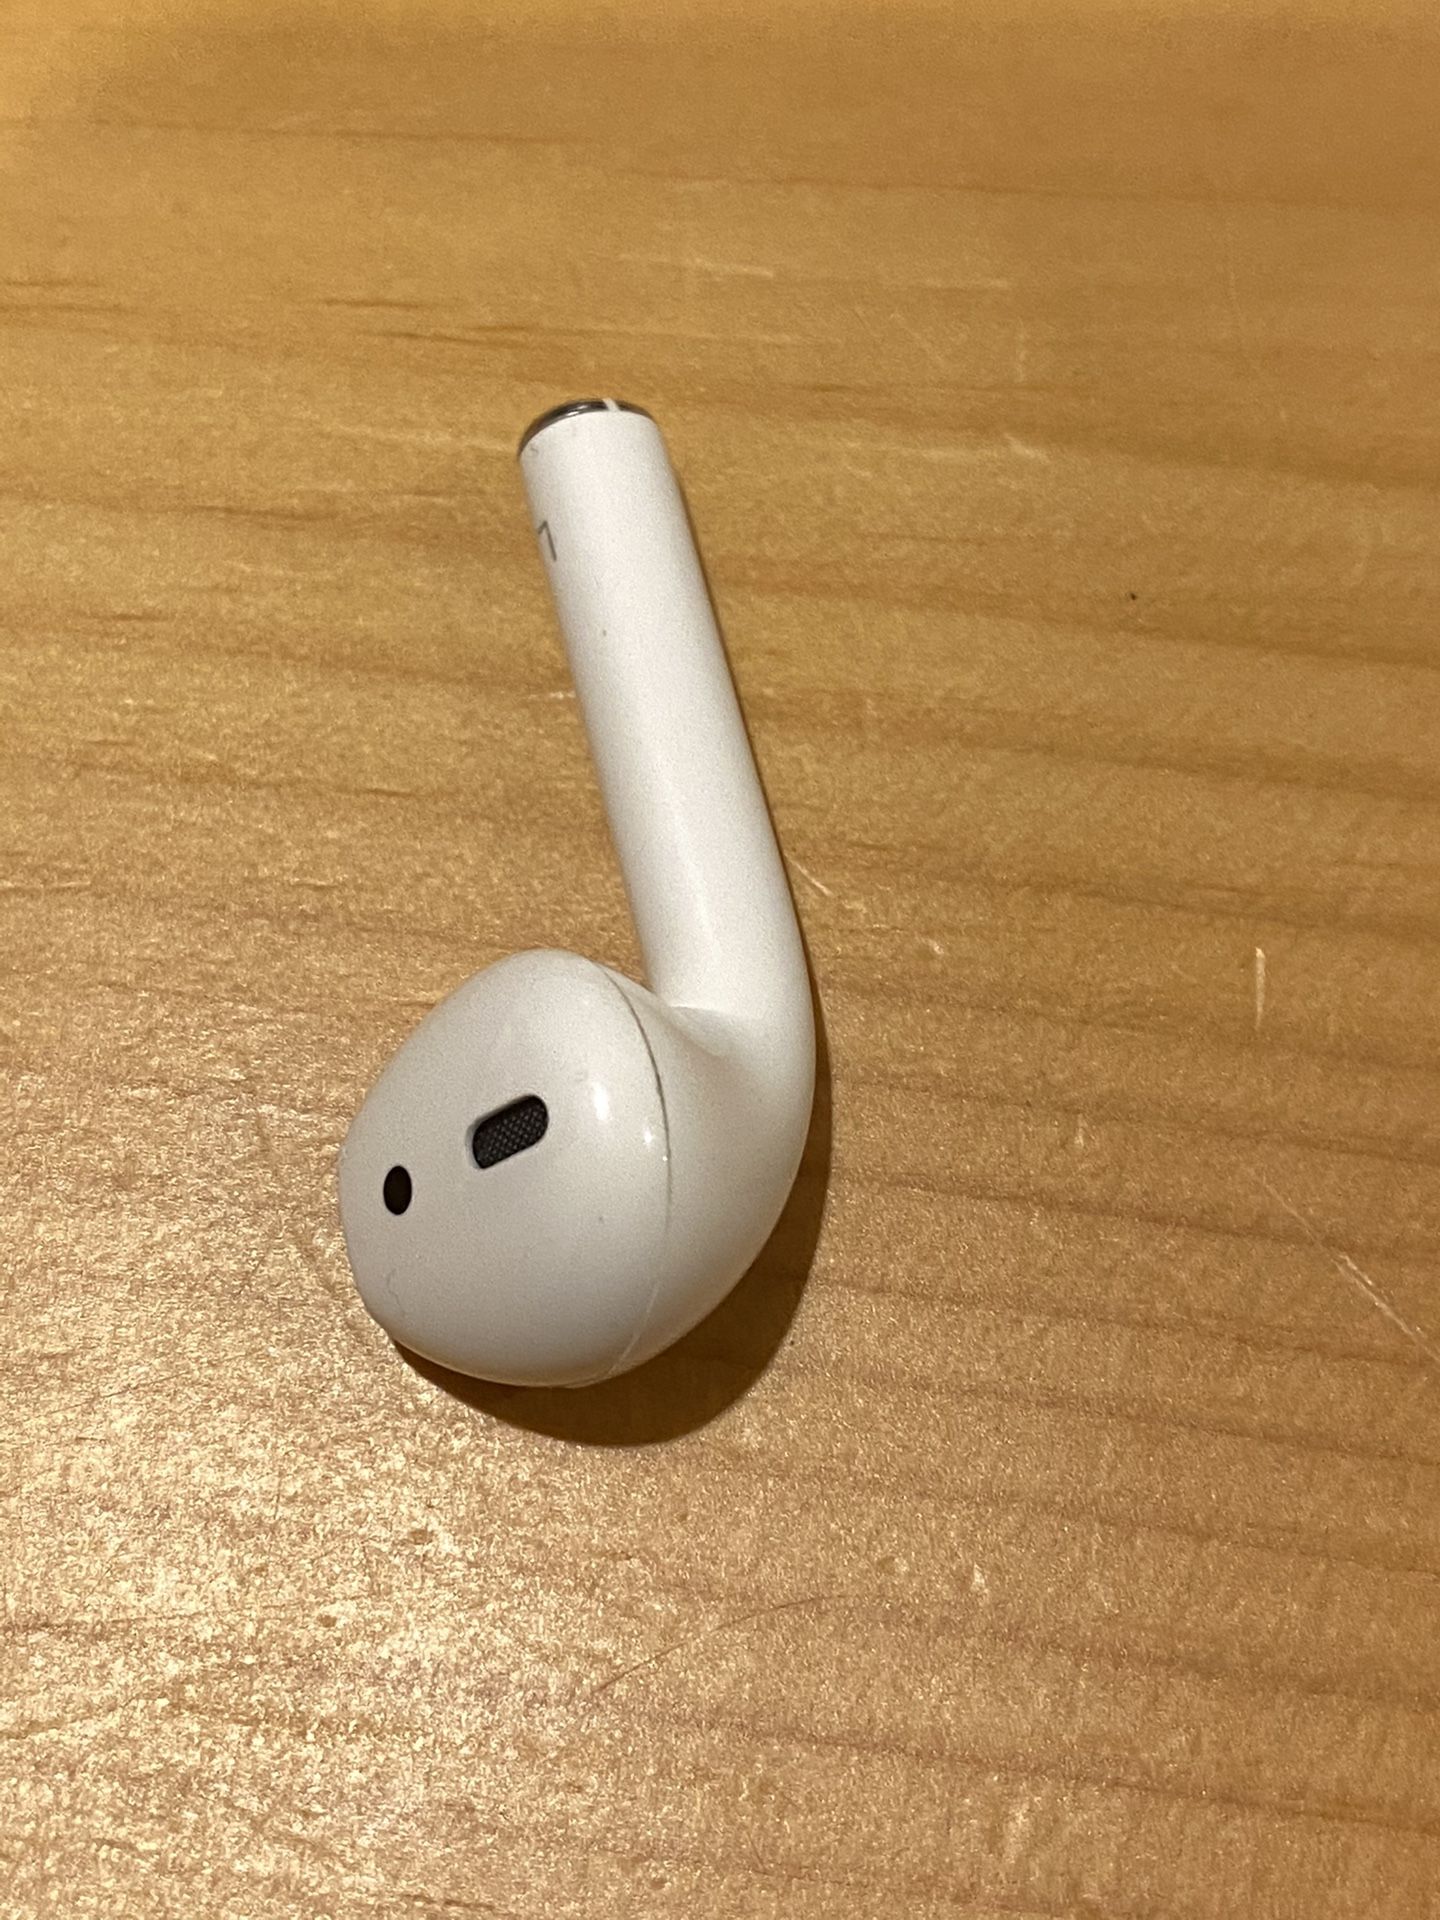 Authentic apple AirPods left earbuds only